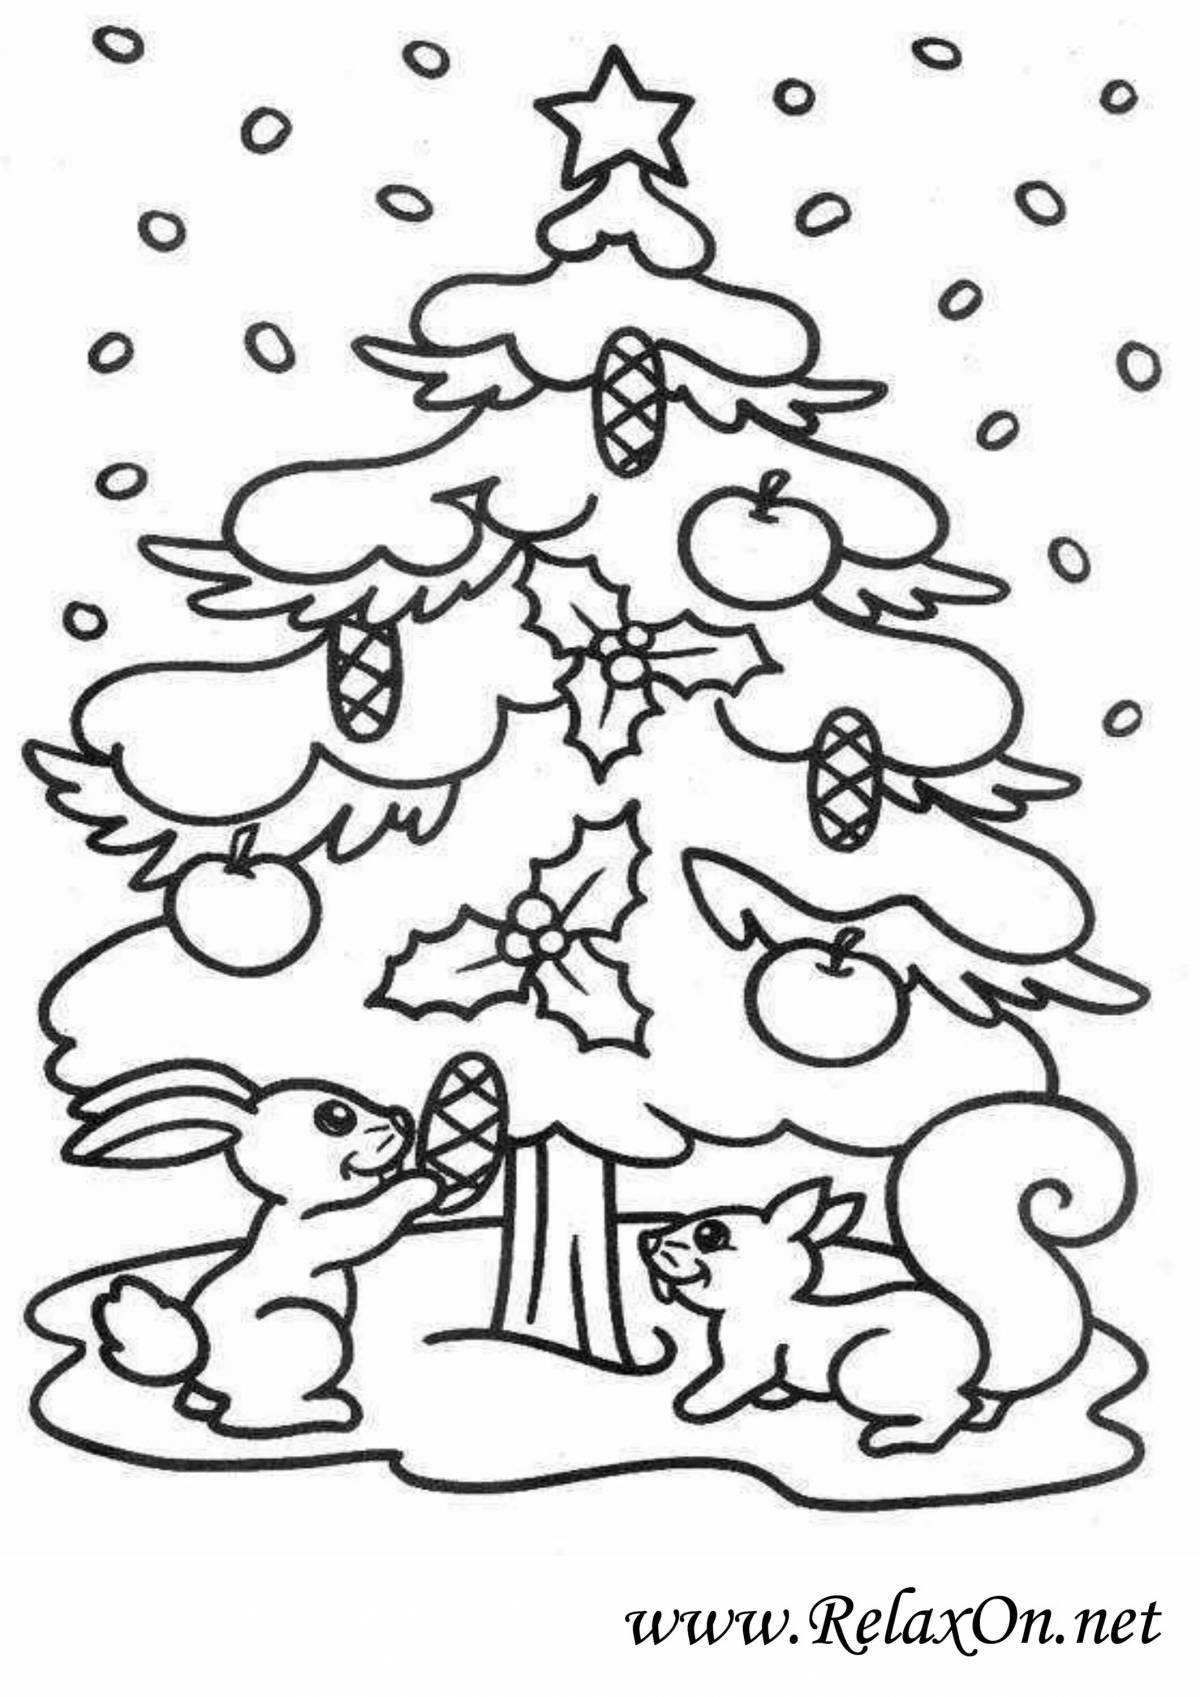 Coloring page bizarre new year story